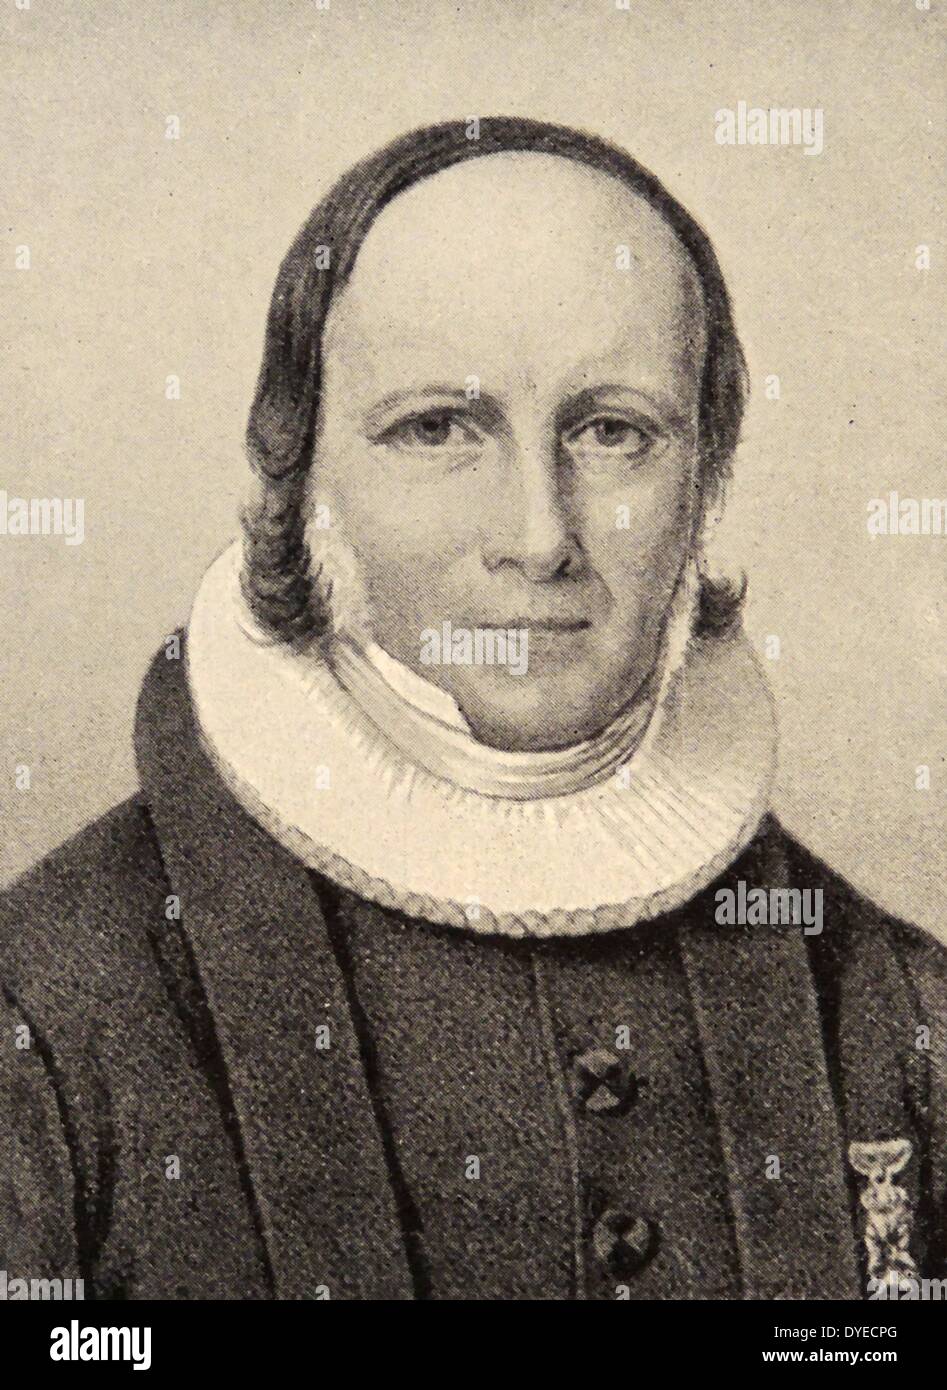 Illustration of Wilhelm Andreas Wexels, a Norwegian priest and author. Dated 1856 Stock Photo